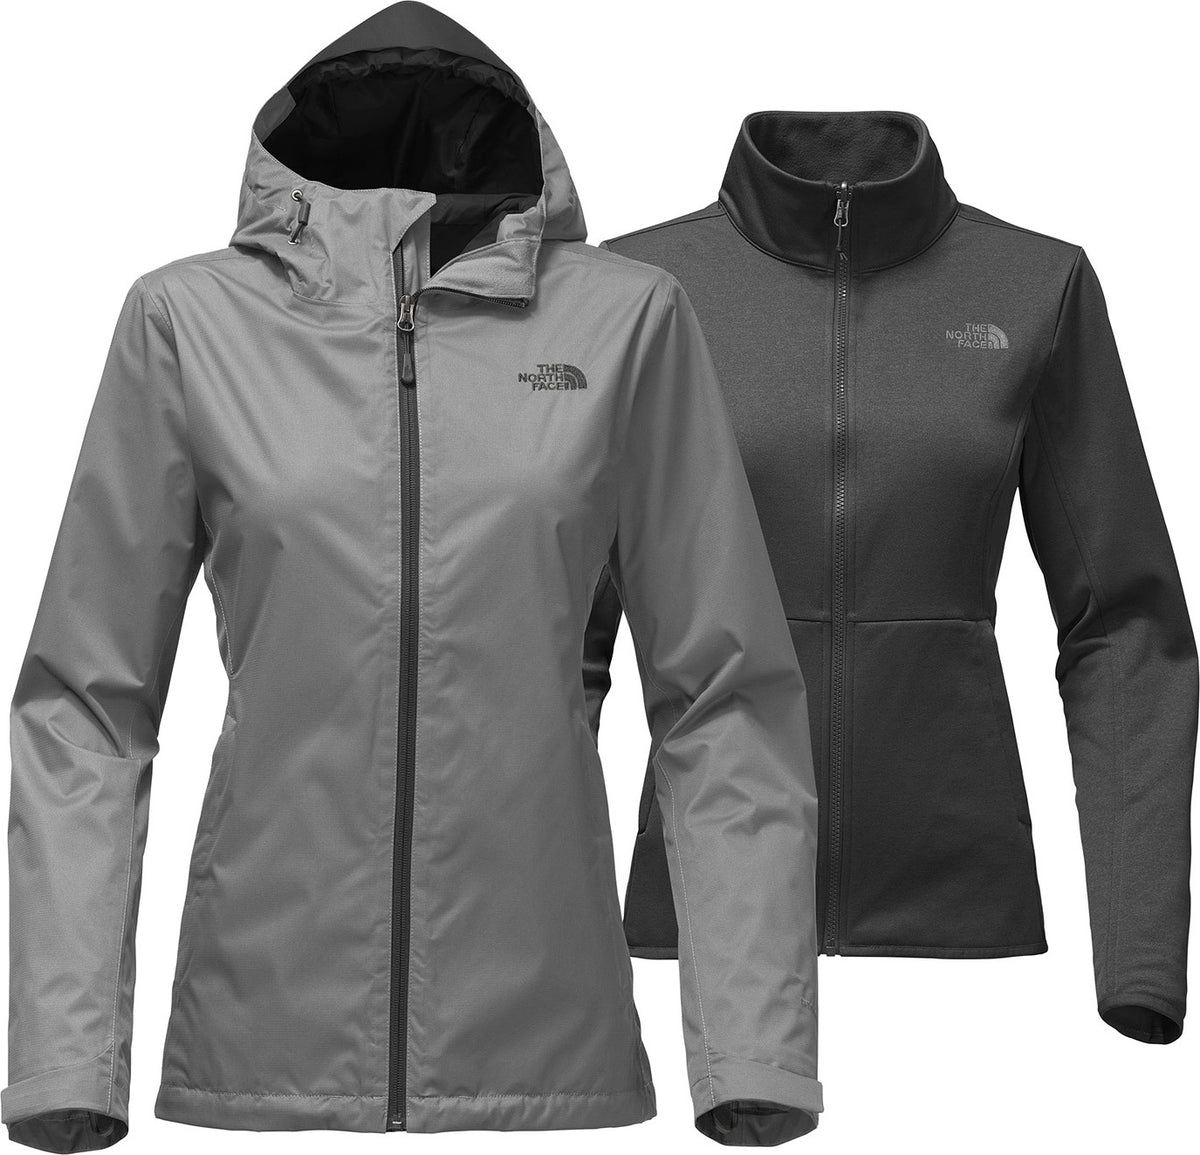 The North Face Arrowood Jacket: An All-In-One Ski Jacket